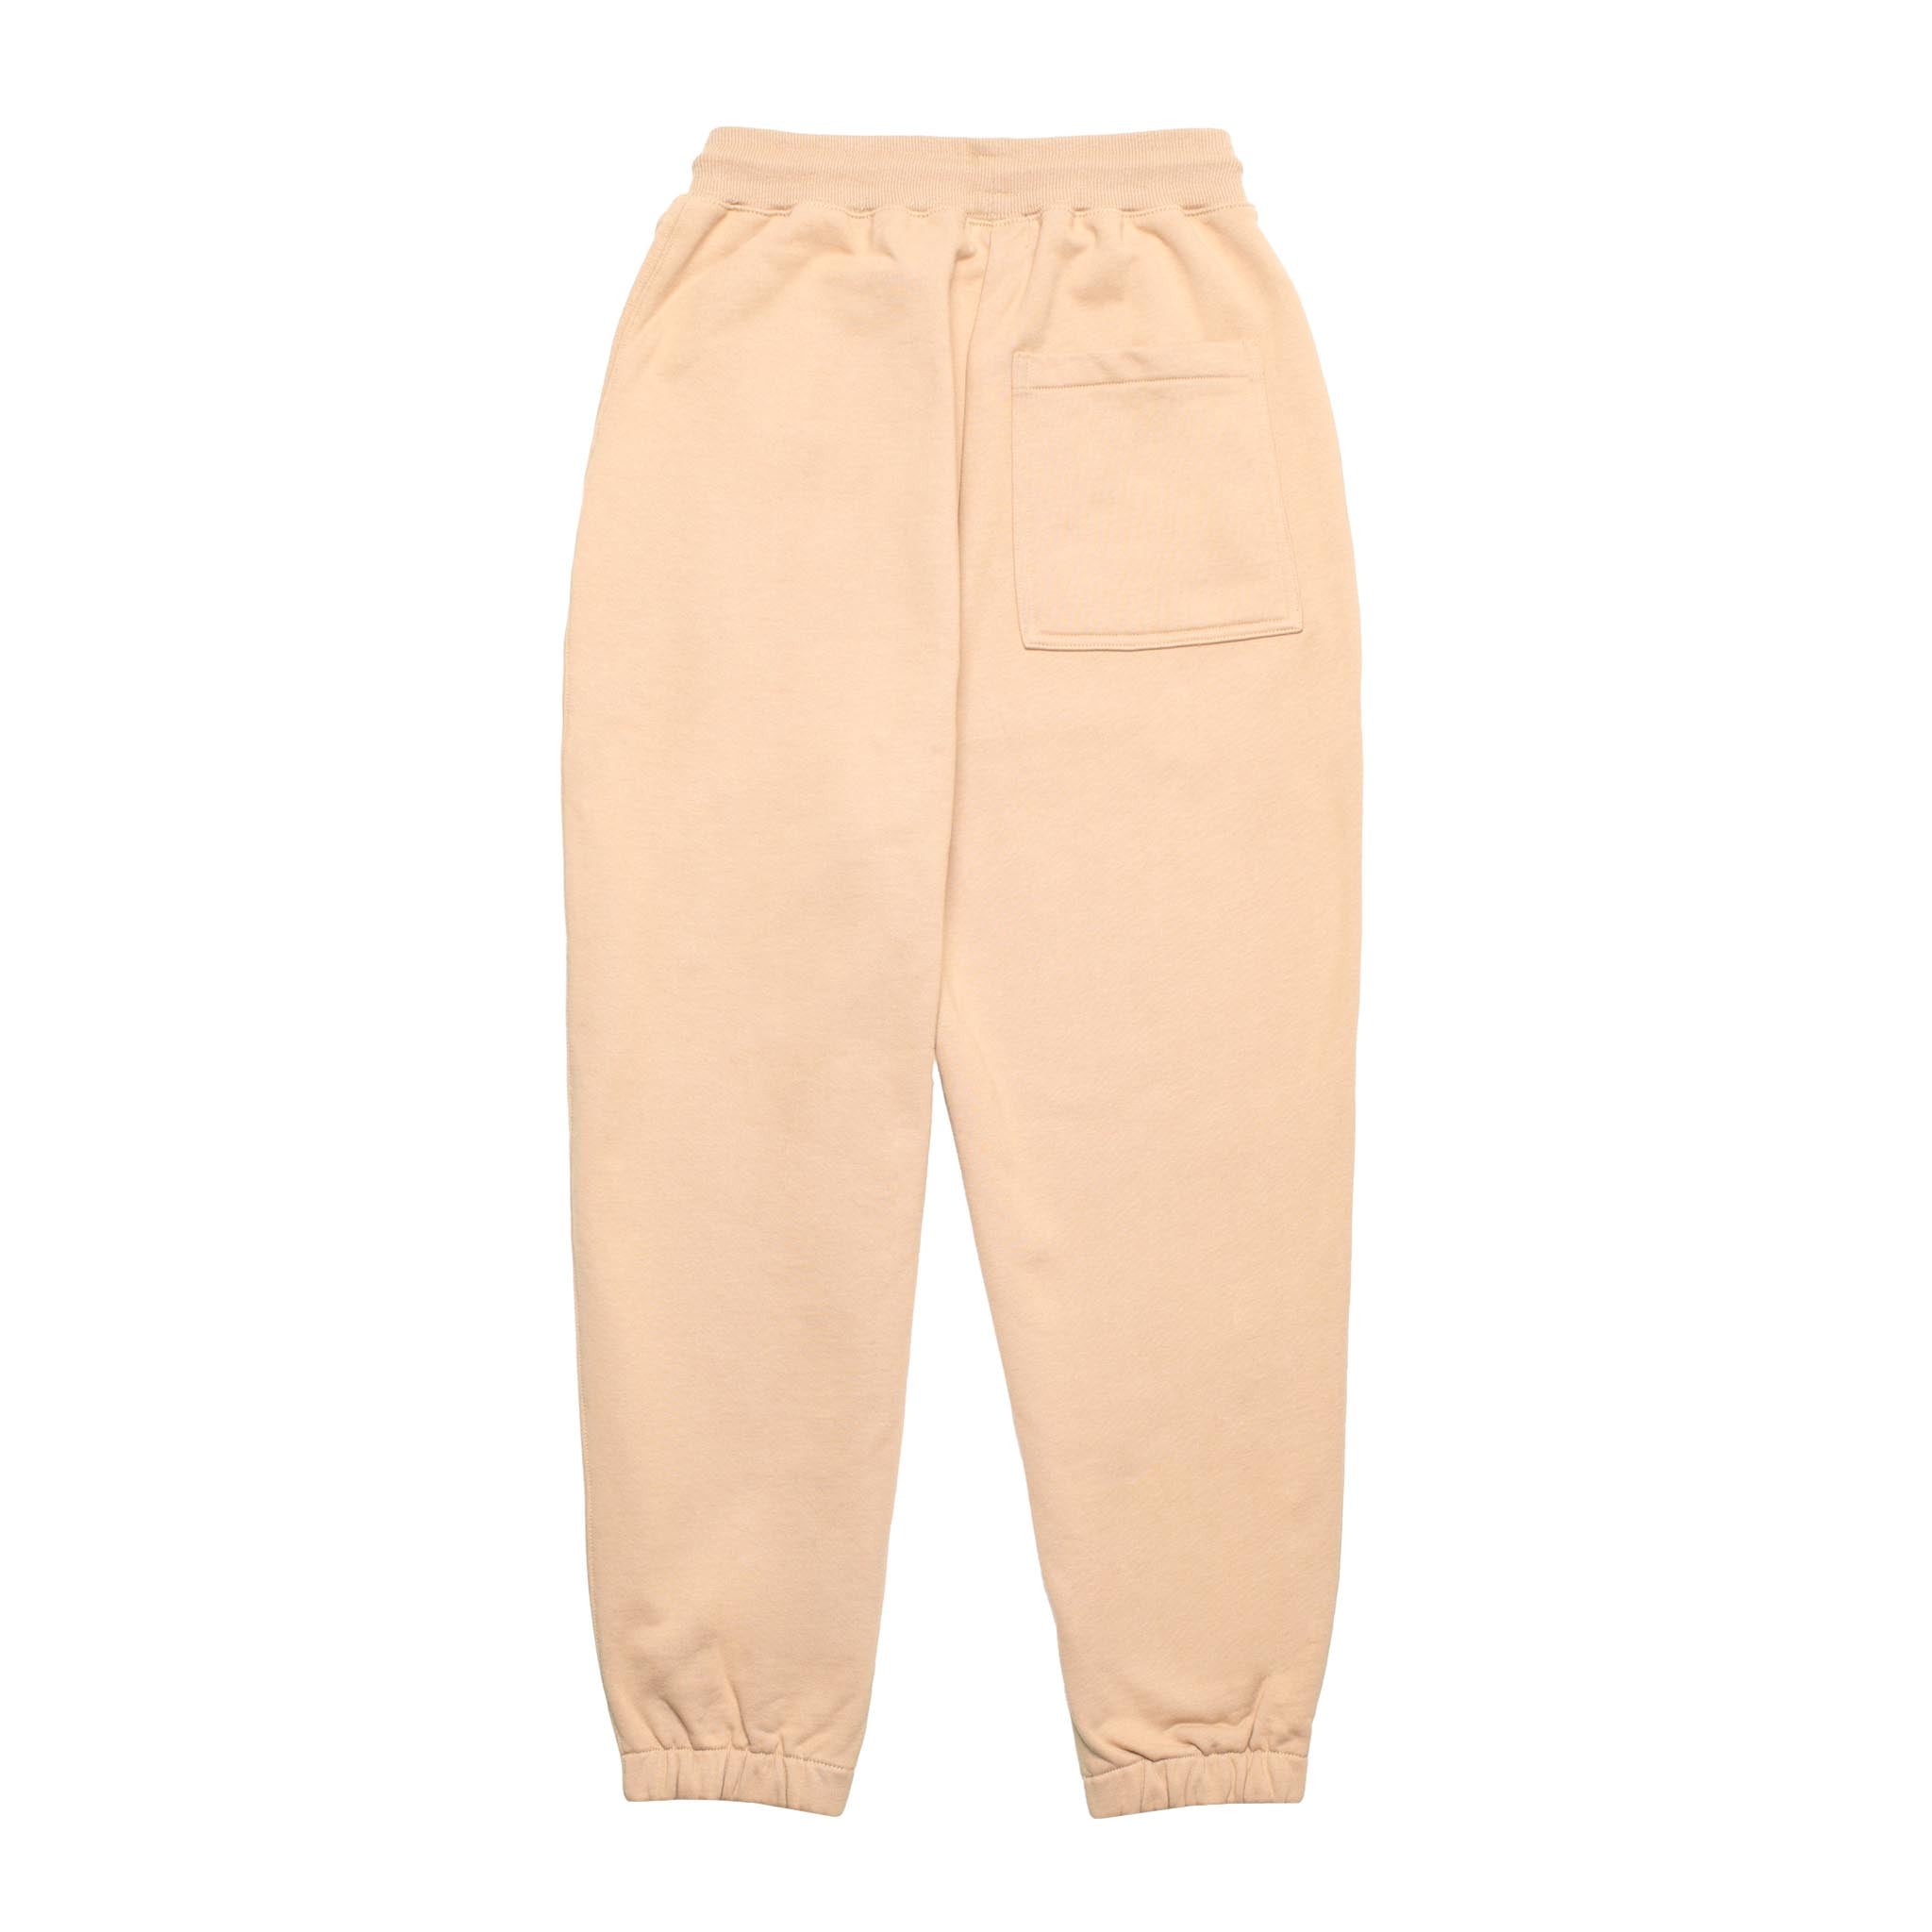 HOMME+ 'ESSENTIAL' Knit Jogger Beige